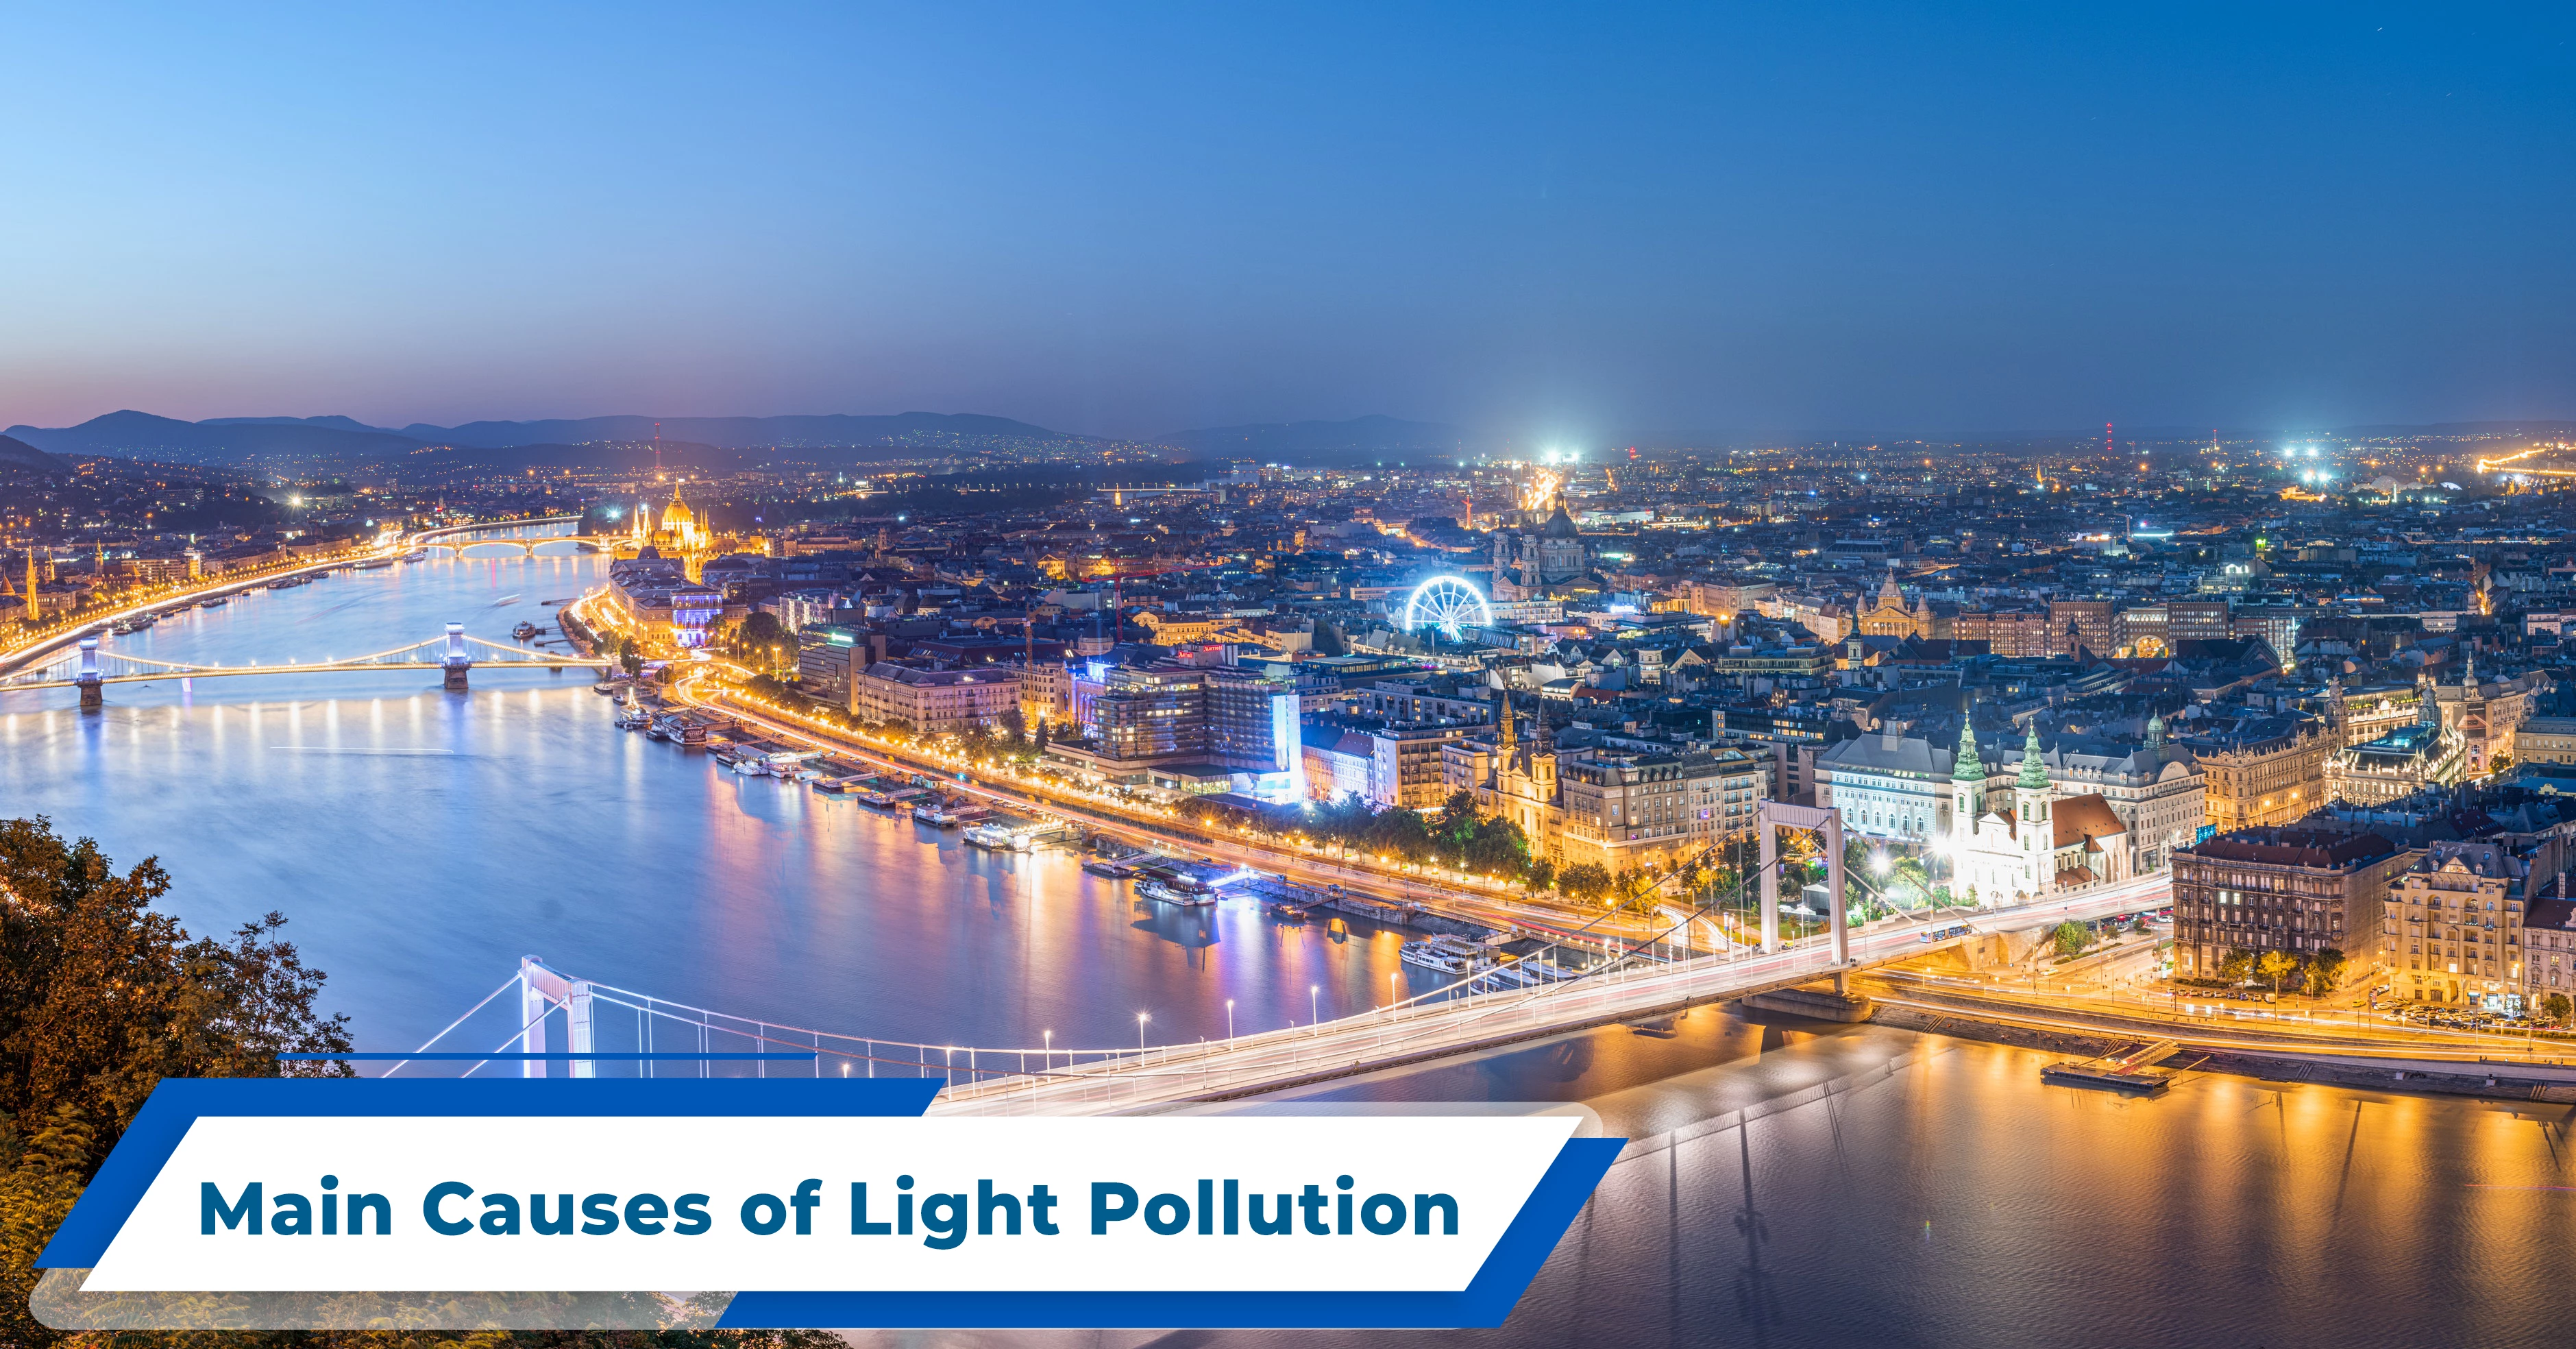 Main Causes of Light Pollution